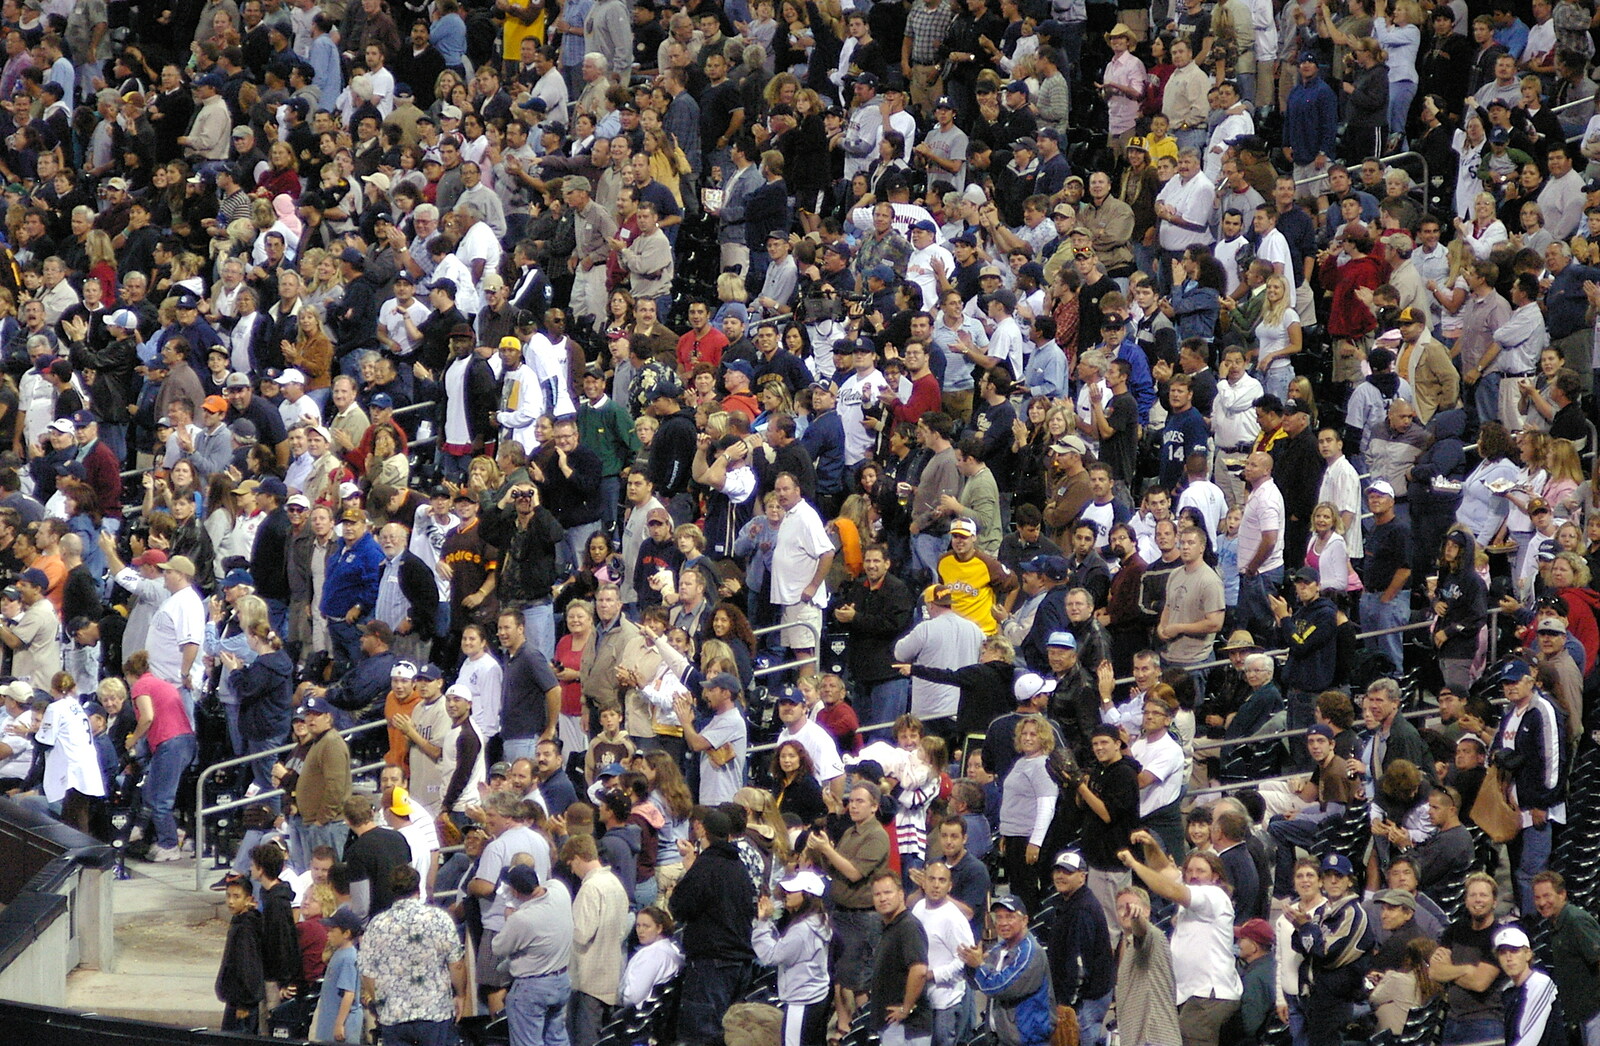 It's a standing ovation from The Padres at Petco Park: a Baseball Game, San Diego, California - 31st May 2005